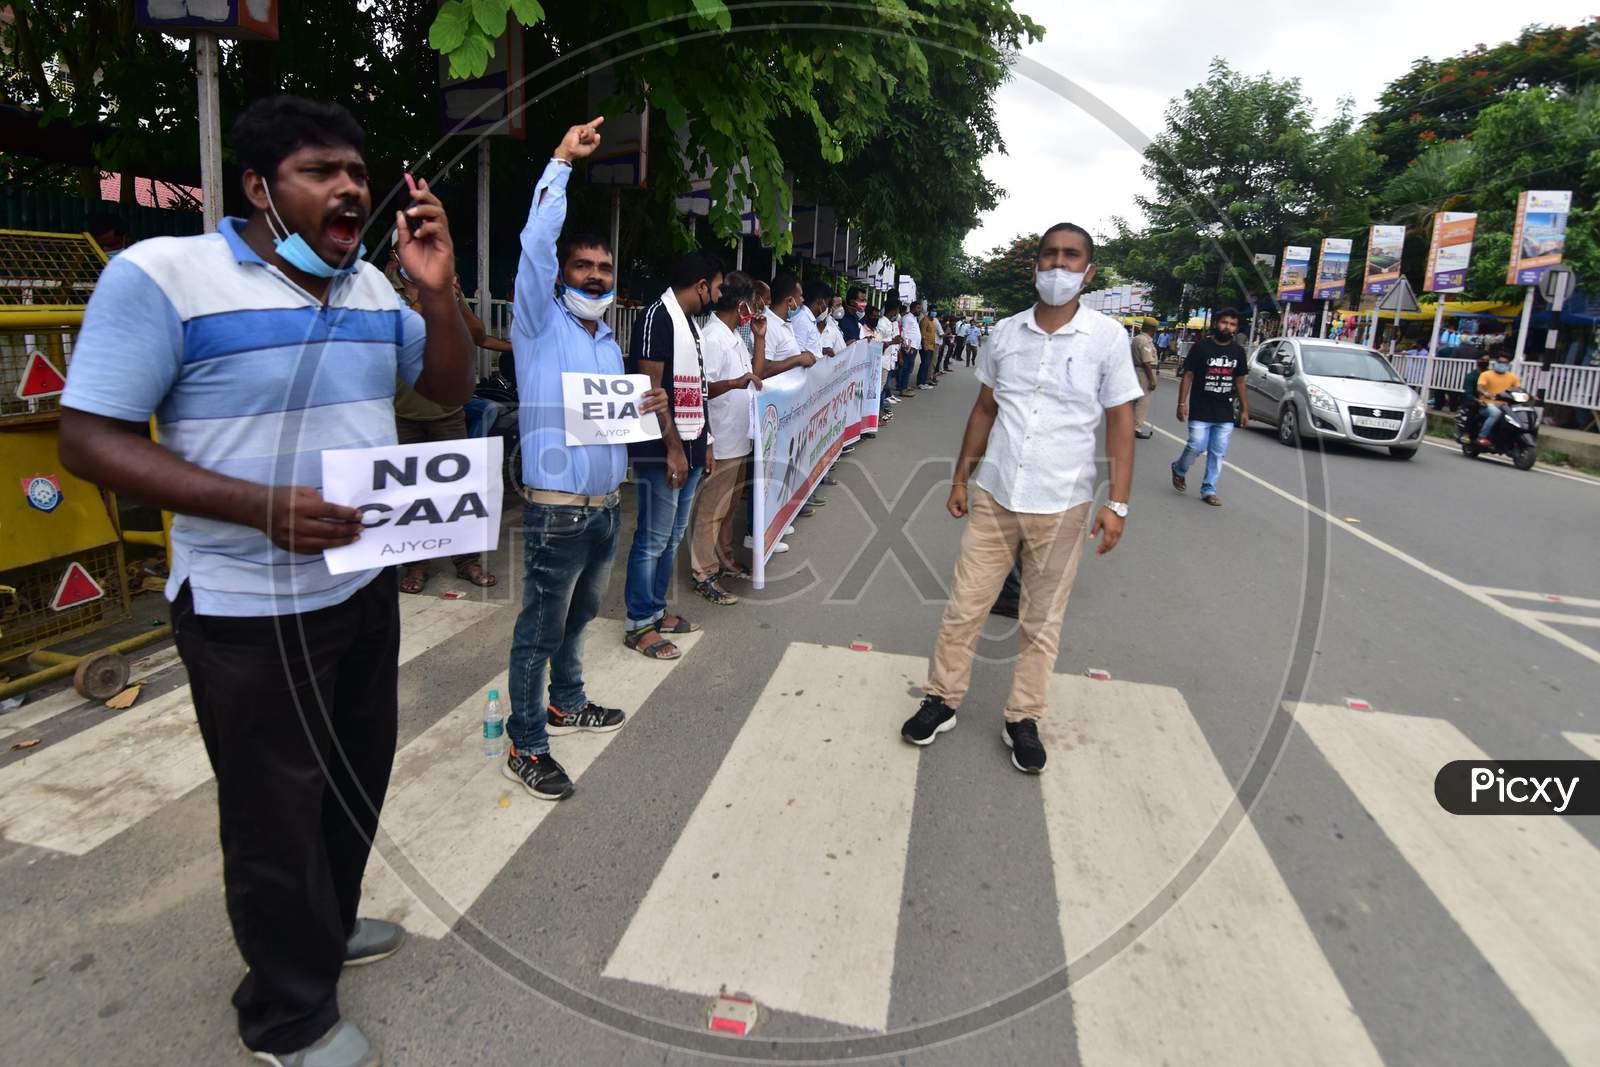 Activists of Asom Jatiyatabadi Yuva Chhatra Parishad (AJYCP),protest against the Implementation Of Environment Impact Assessment (Eia) Draft in Nagaon district of Assam on August 17,2020.